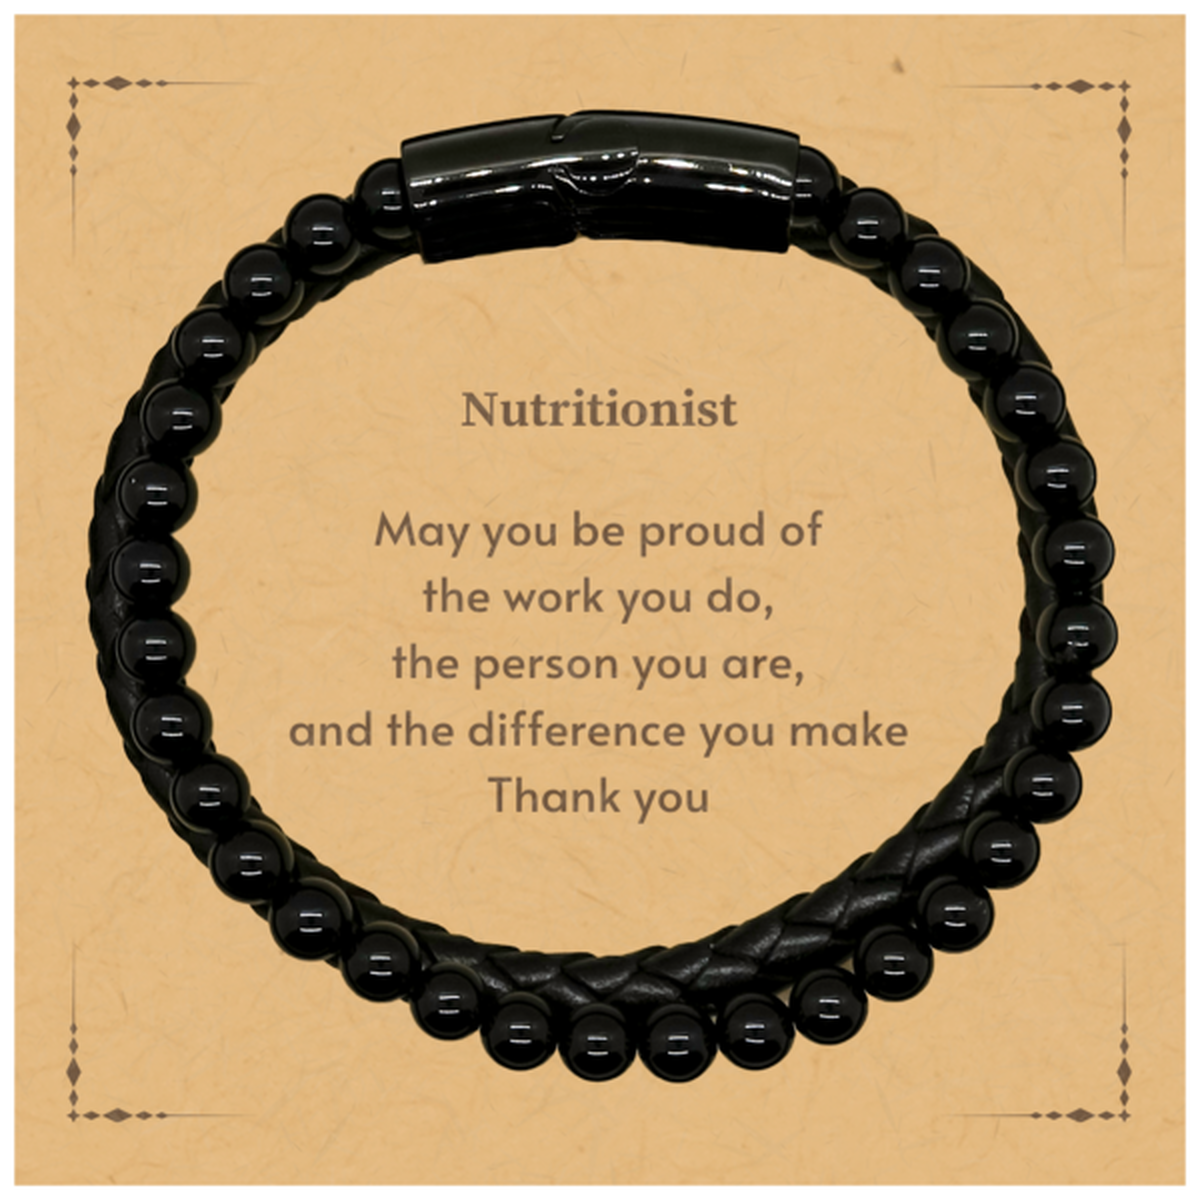 Heartwarming Stone Leather Bracelets Retirement Coworkers Gifts for Nutritionist, Nutritionist May You be proud of the work you do, the person you are Gifts for Boss Men Women Friends